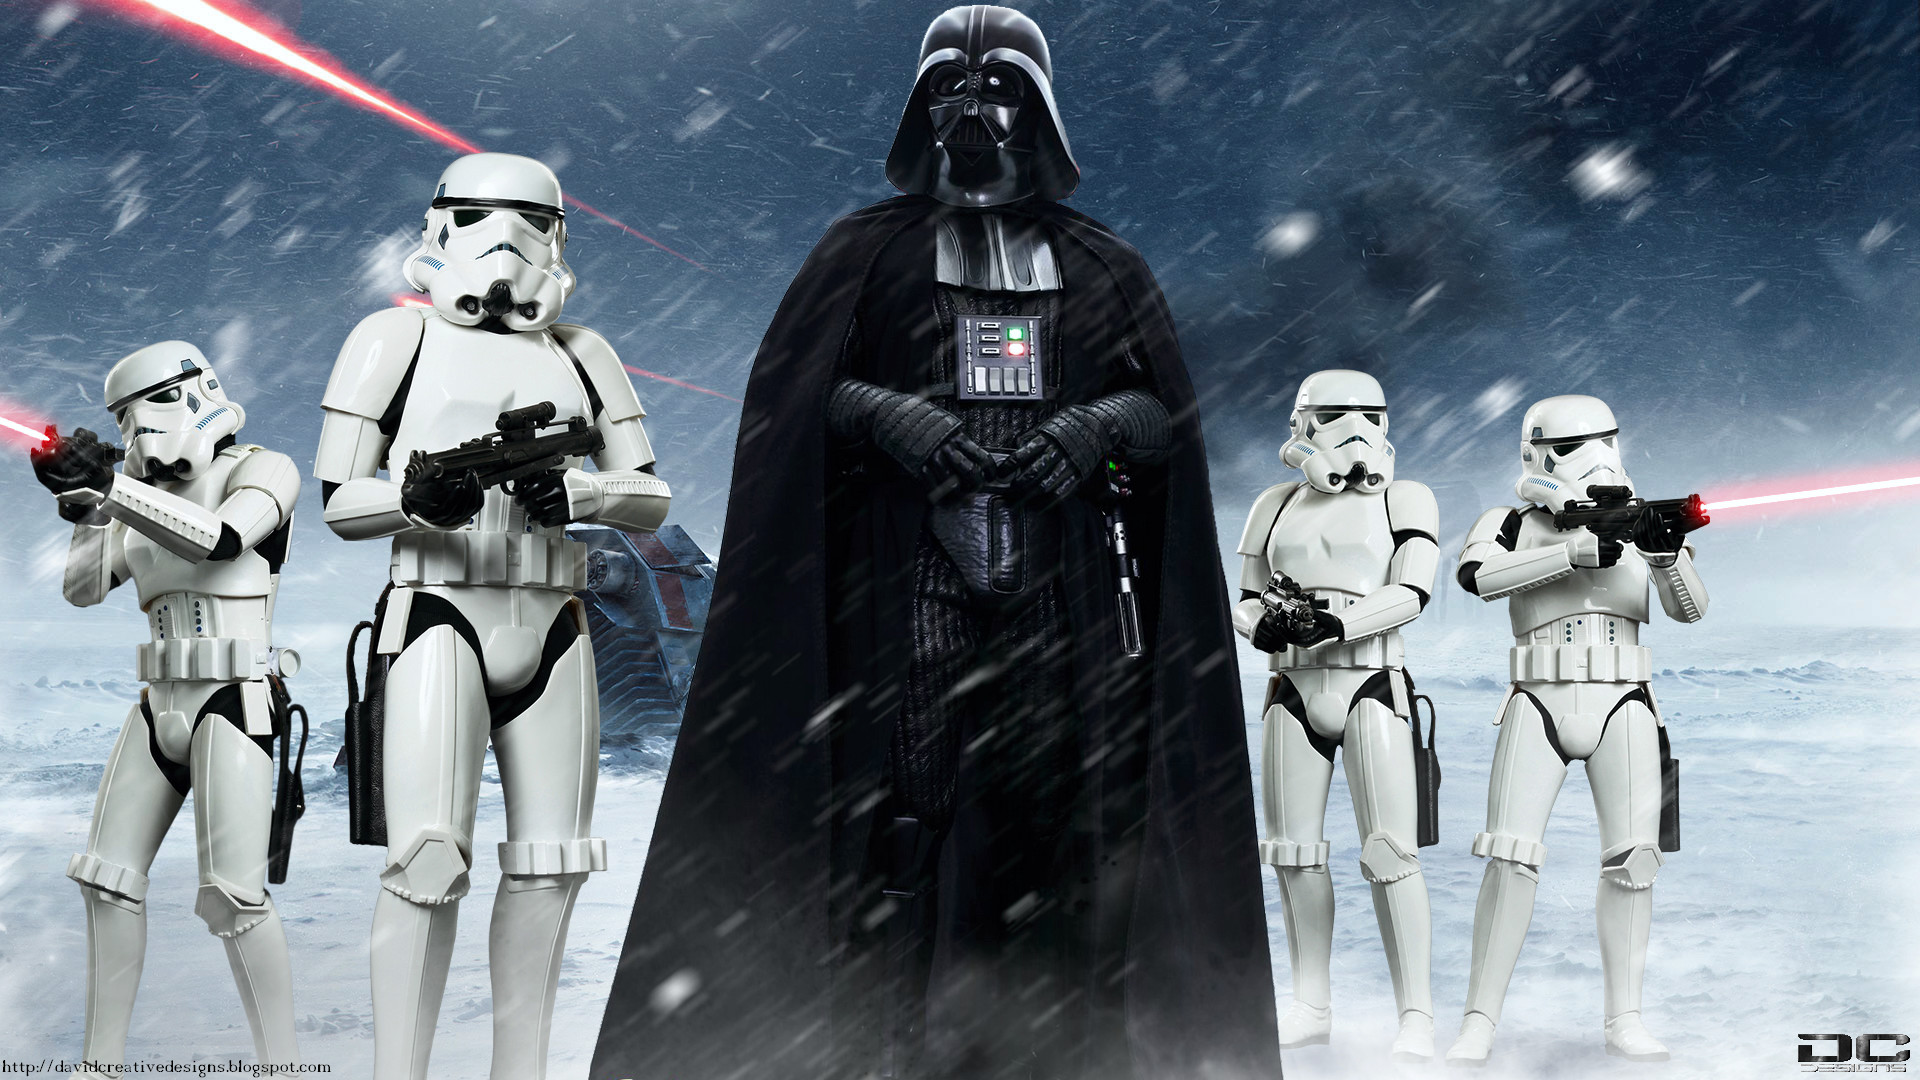 Darth Vader Wallpapers, HD Images Collection of Darth Vader 2743670 by Bill Kimberlin